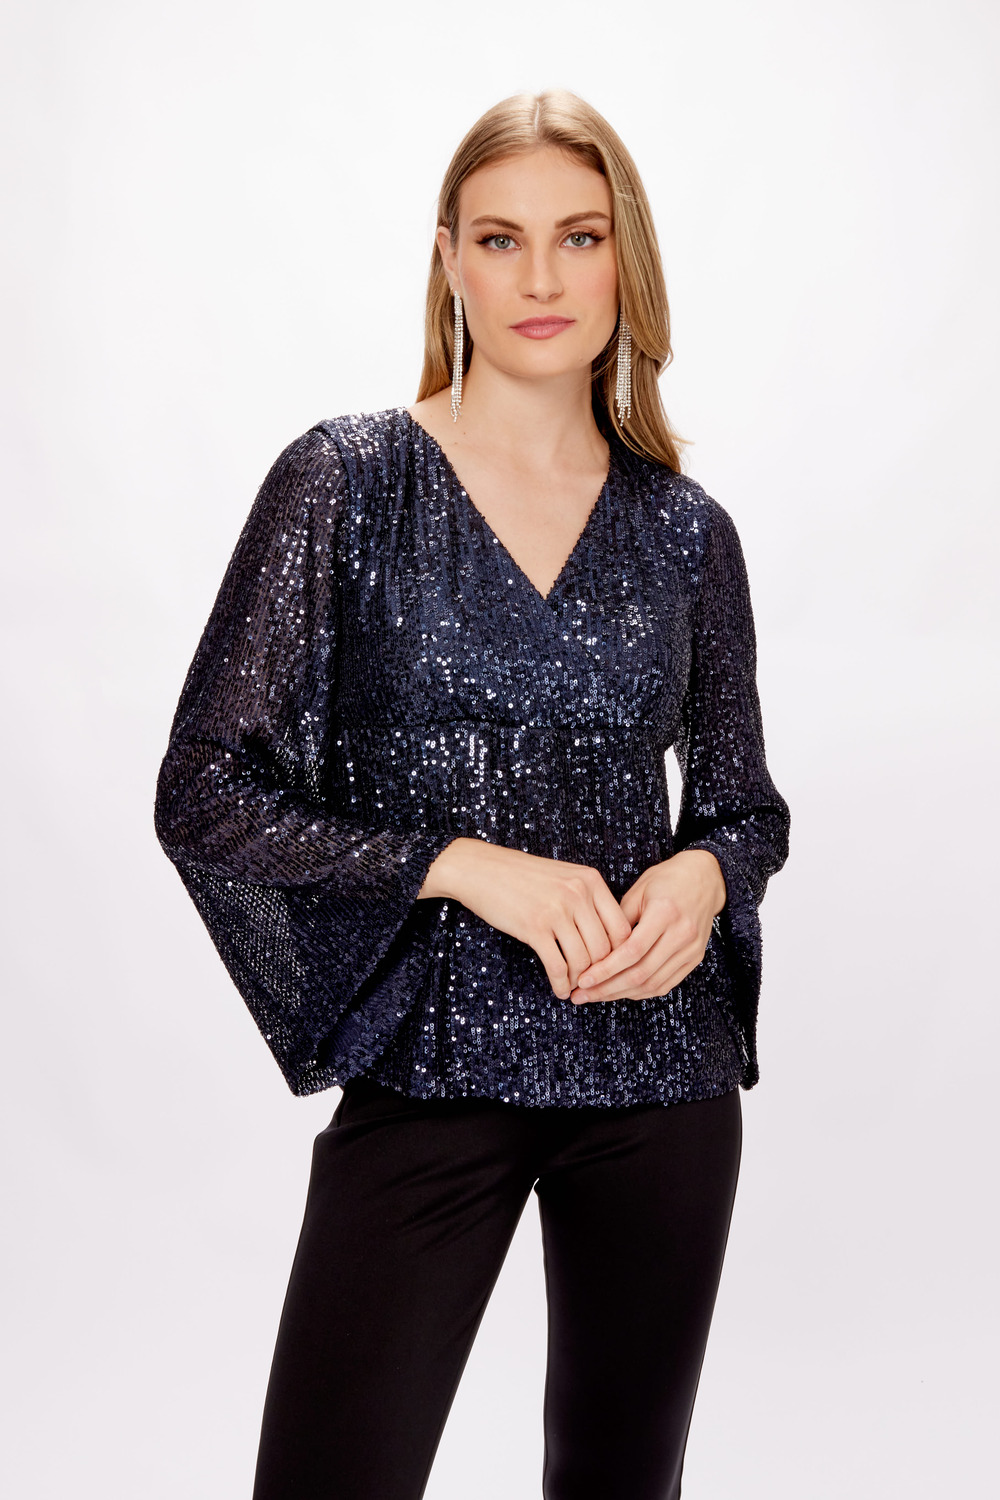 All-Over Sequin Top Style 234231. Midnight Blue/midnight Blue